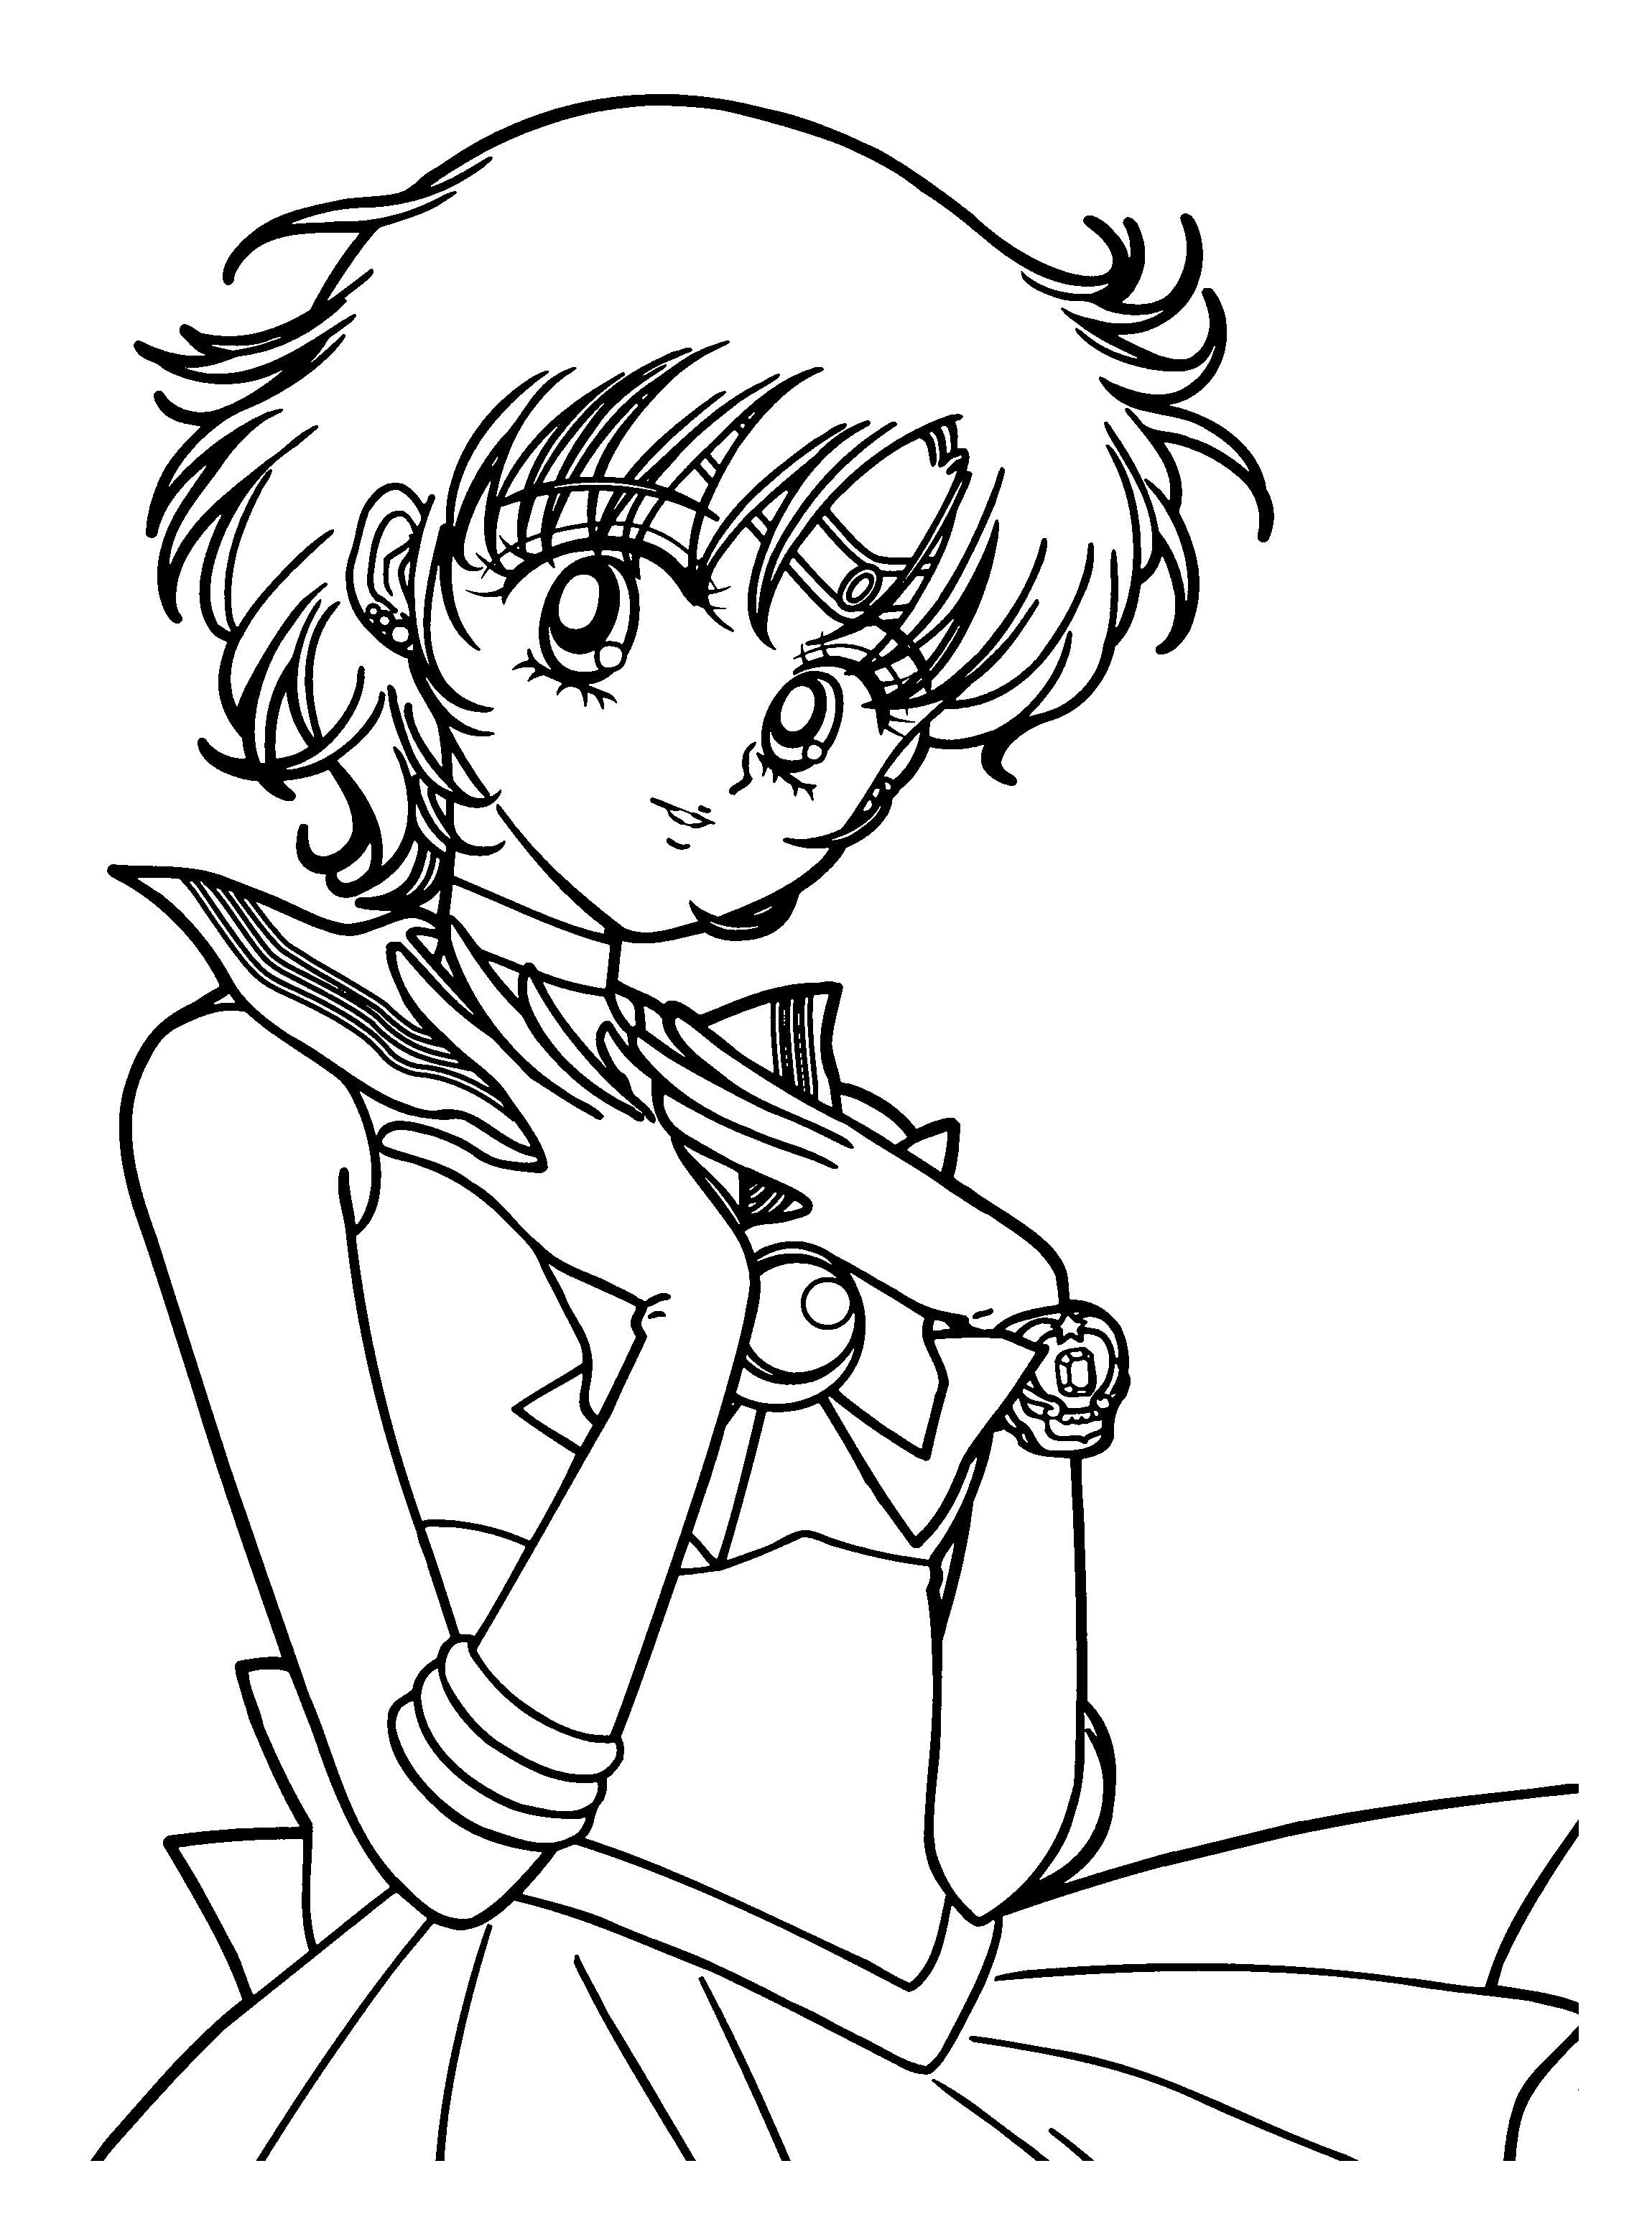 animated-coloring-pages-sailor-moon-image-0022